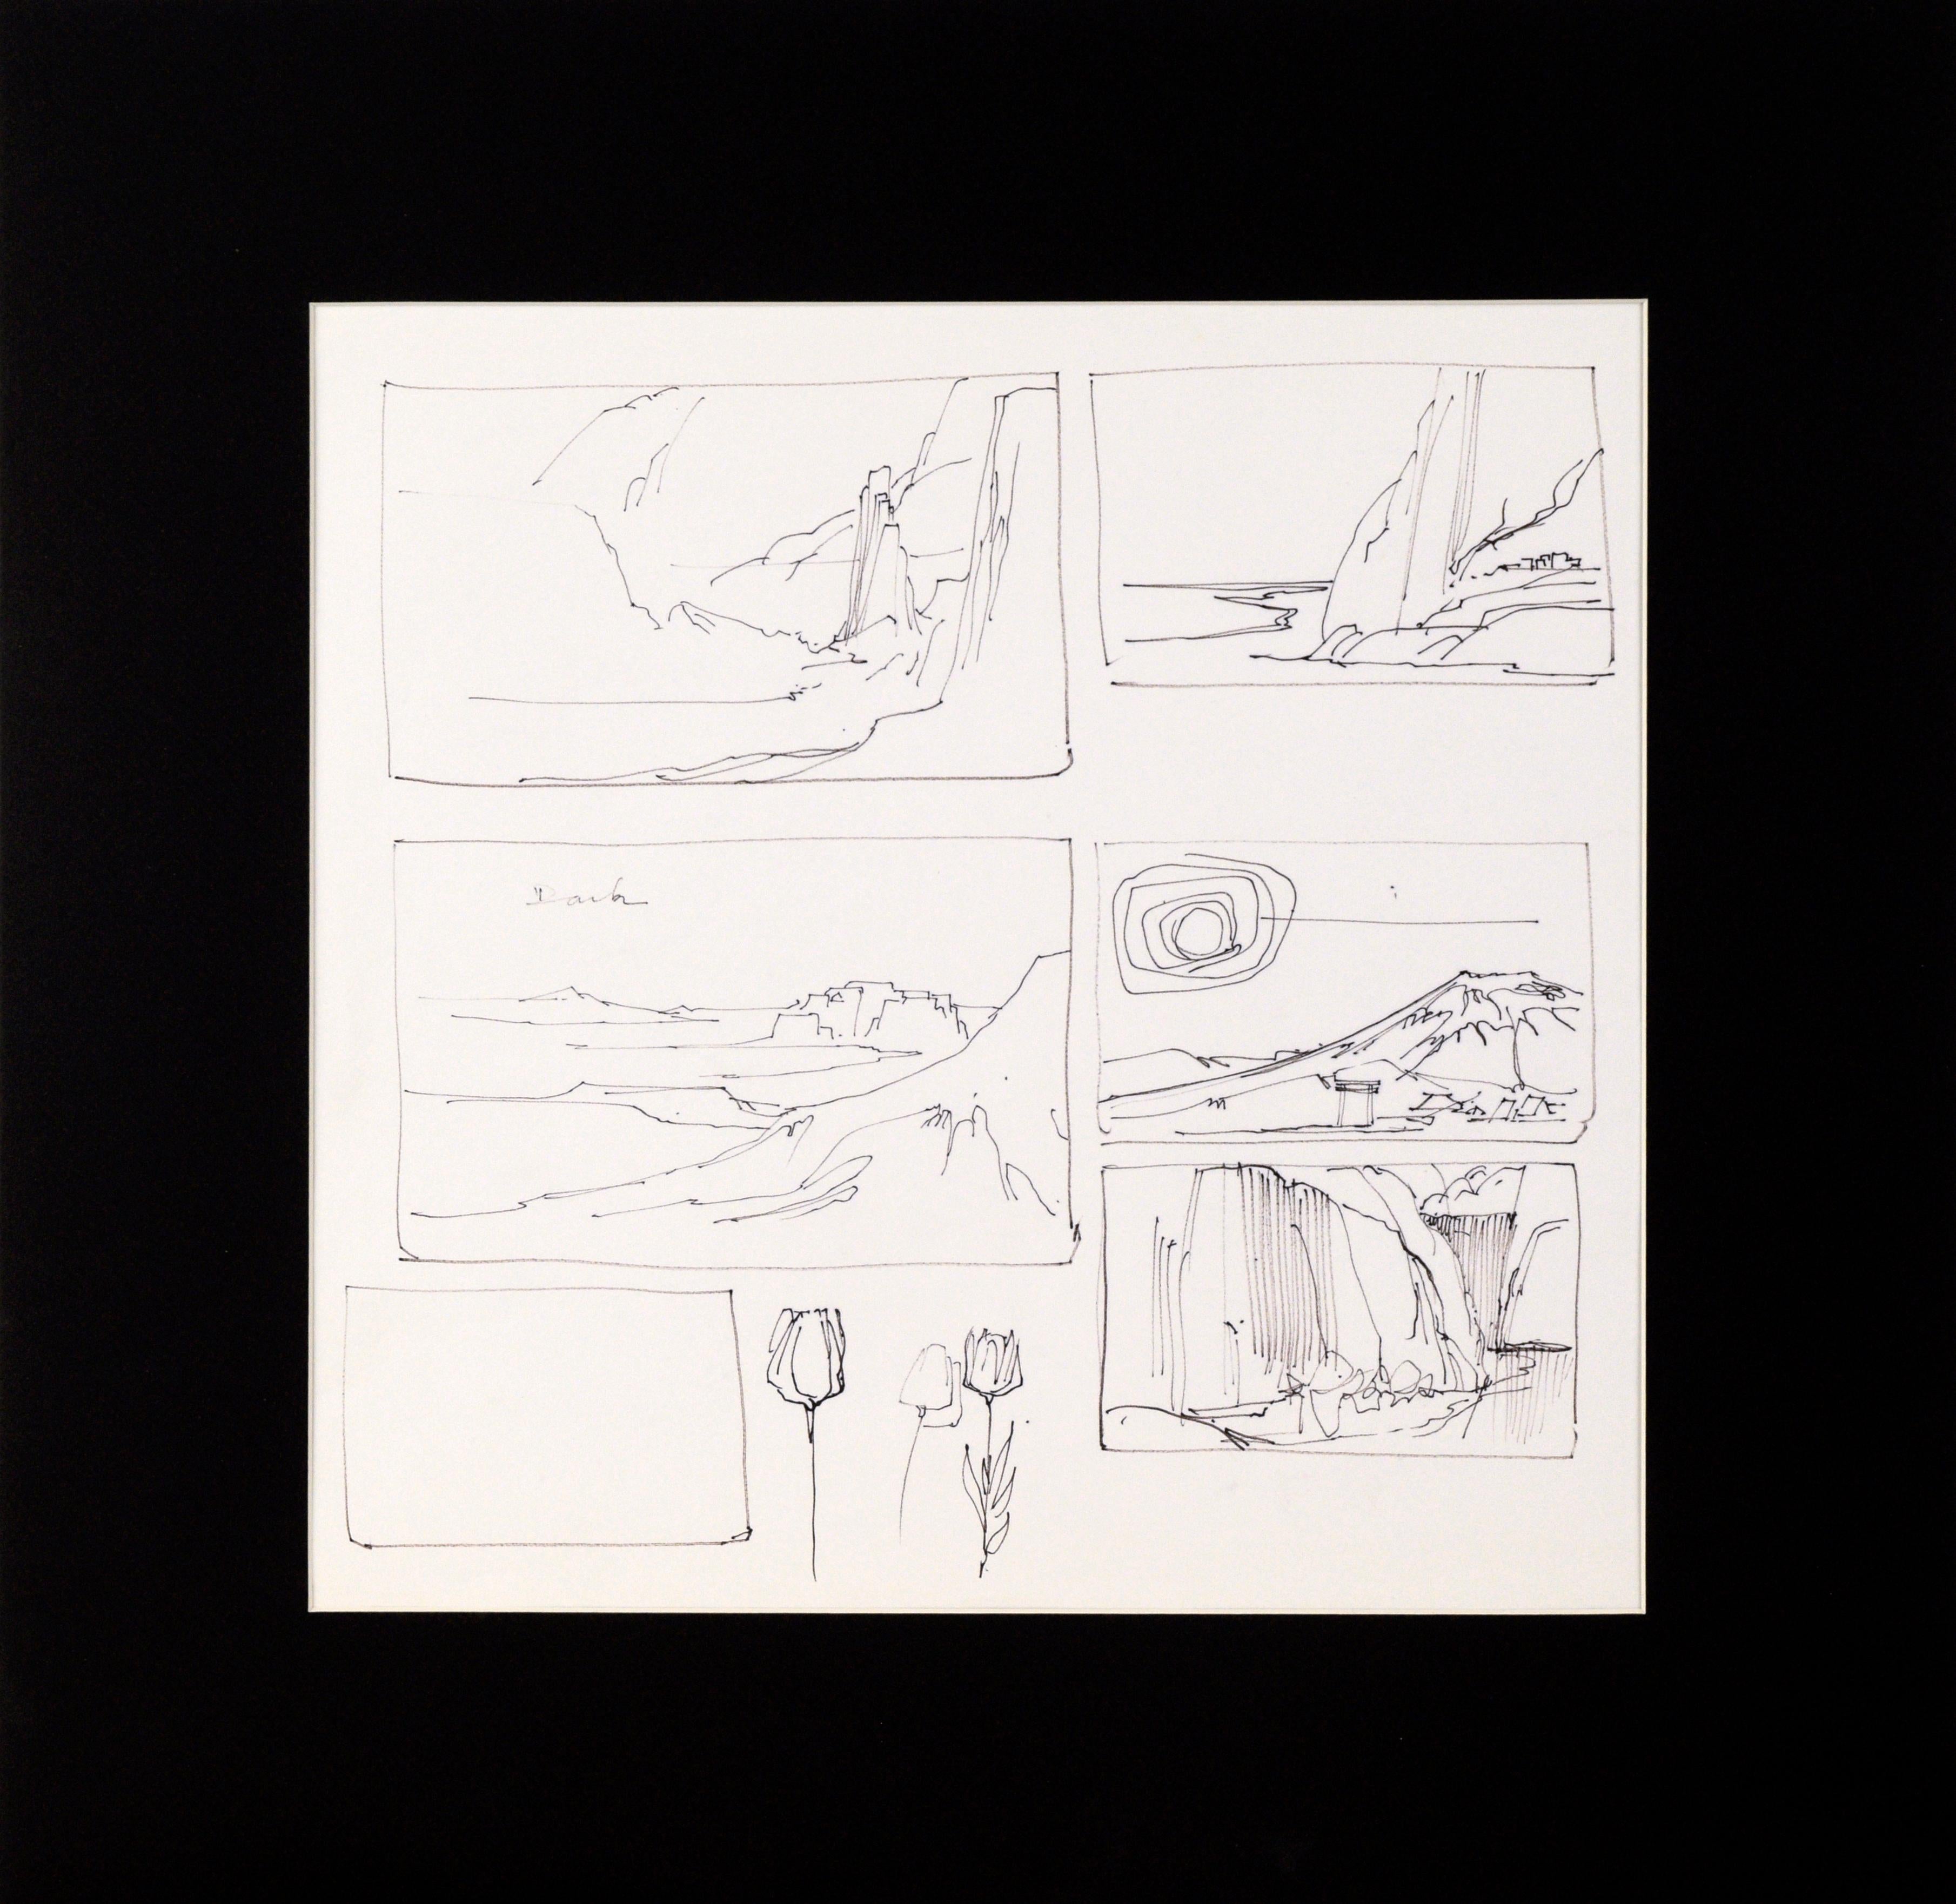 Laurence Sisson Landscape Art - Five-Panel Thumbnail Sketches of Desert and Canyon Landscapes in Ink on Paper